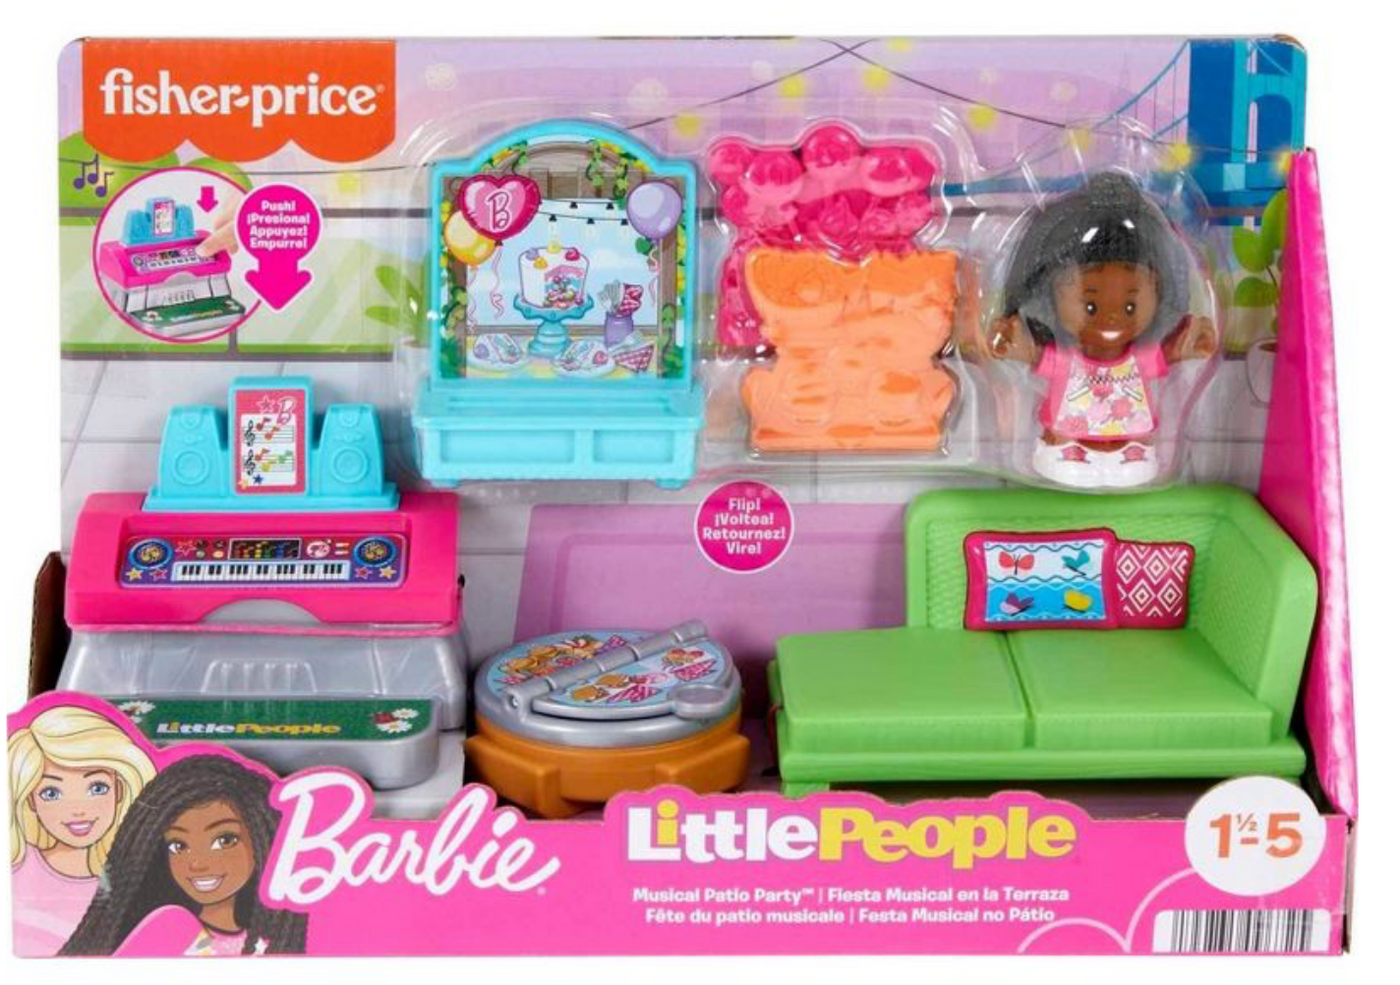 Fisher-Price Little People Barbie Musical Patio Party Playset Toy New With Box